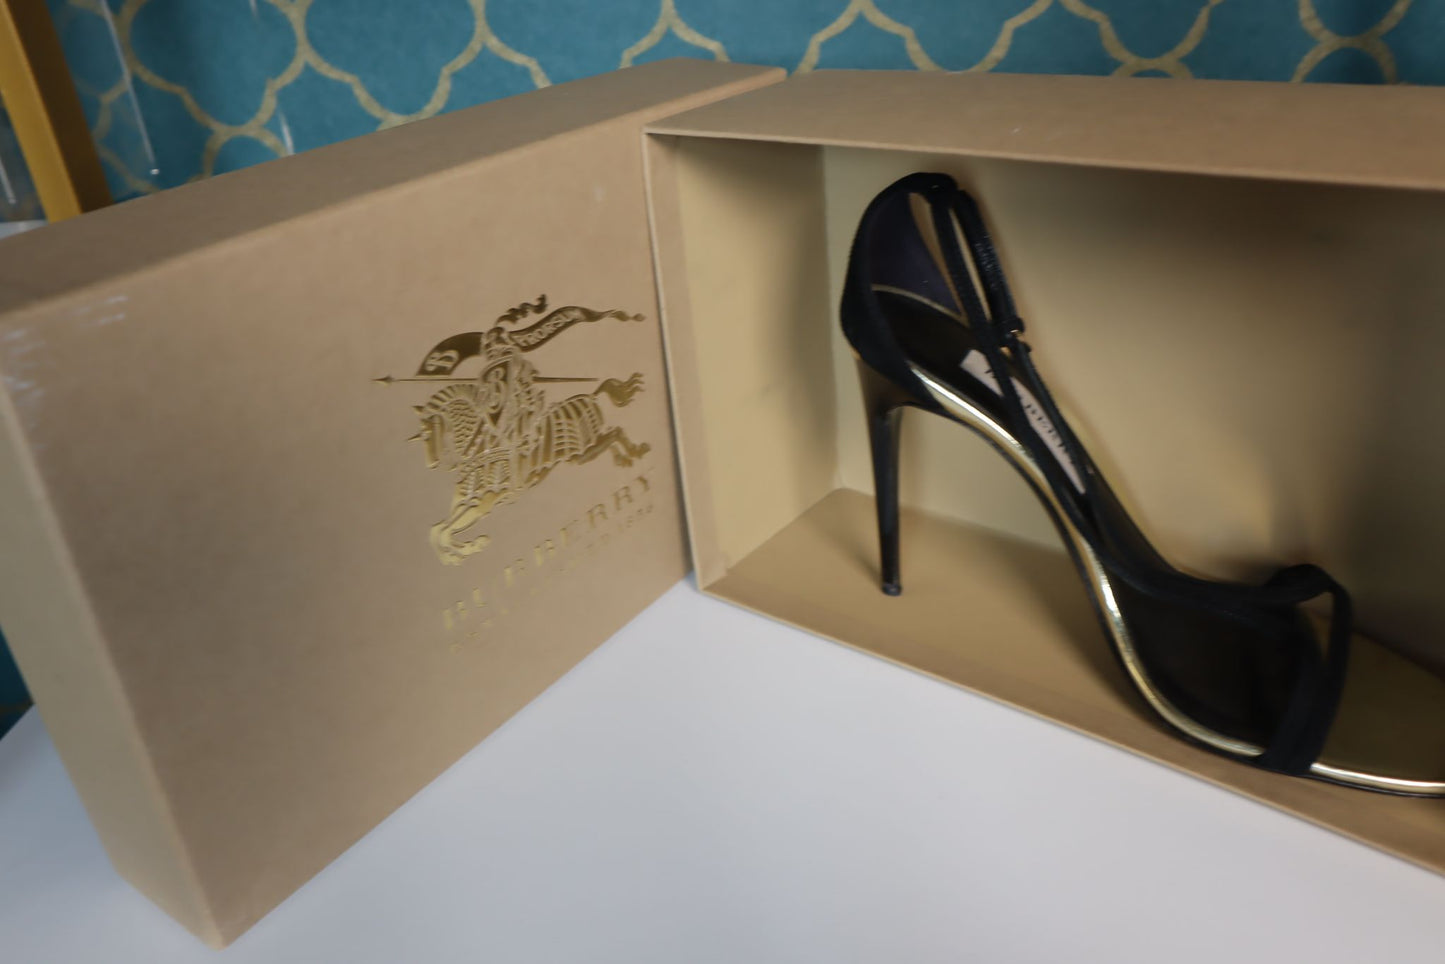 Burberry Black Suede Leather And Gold Stiletto